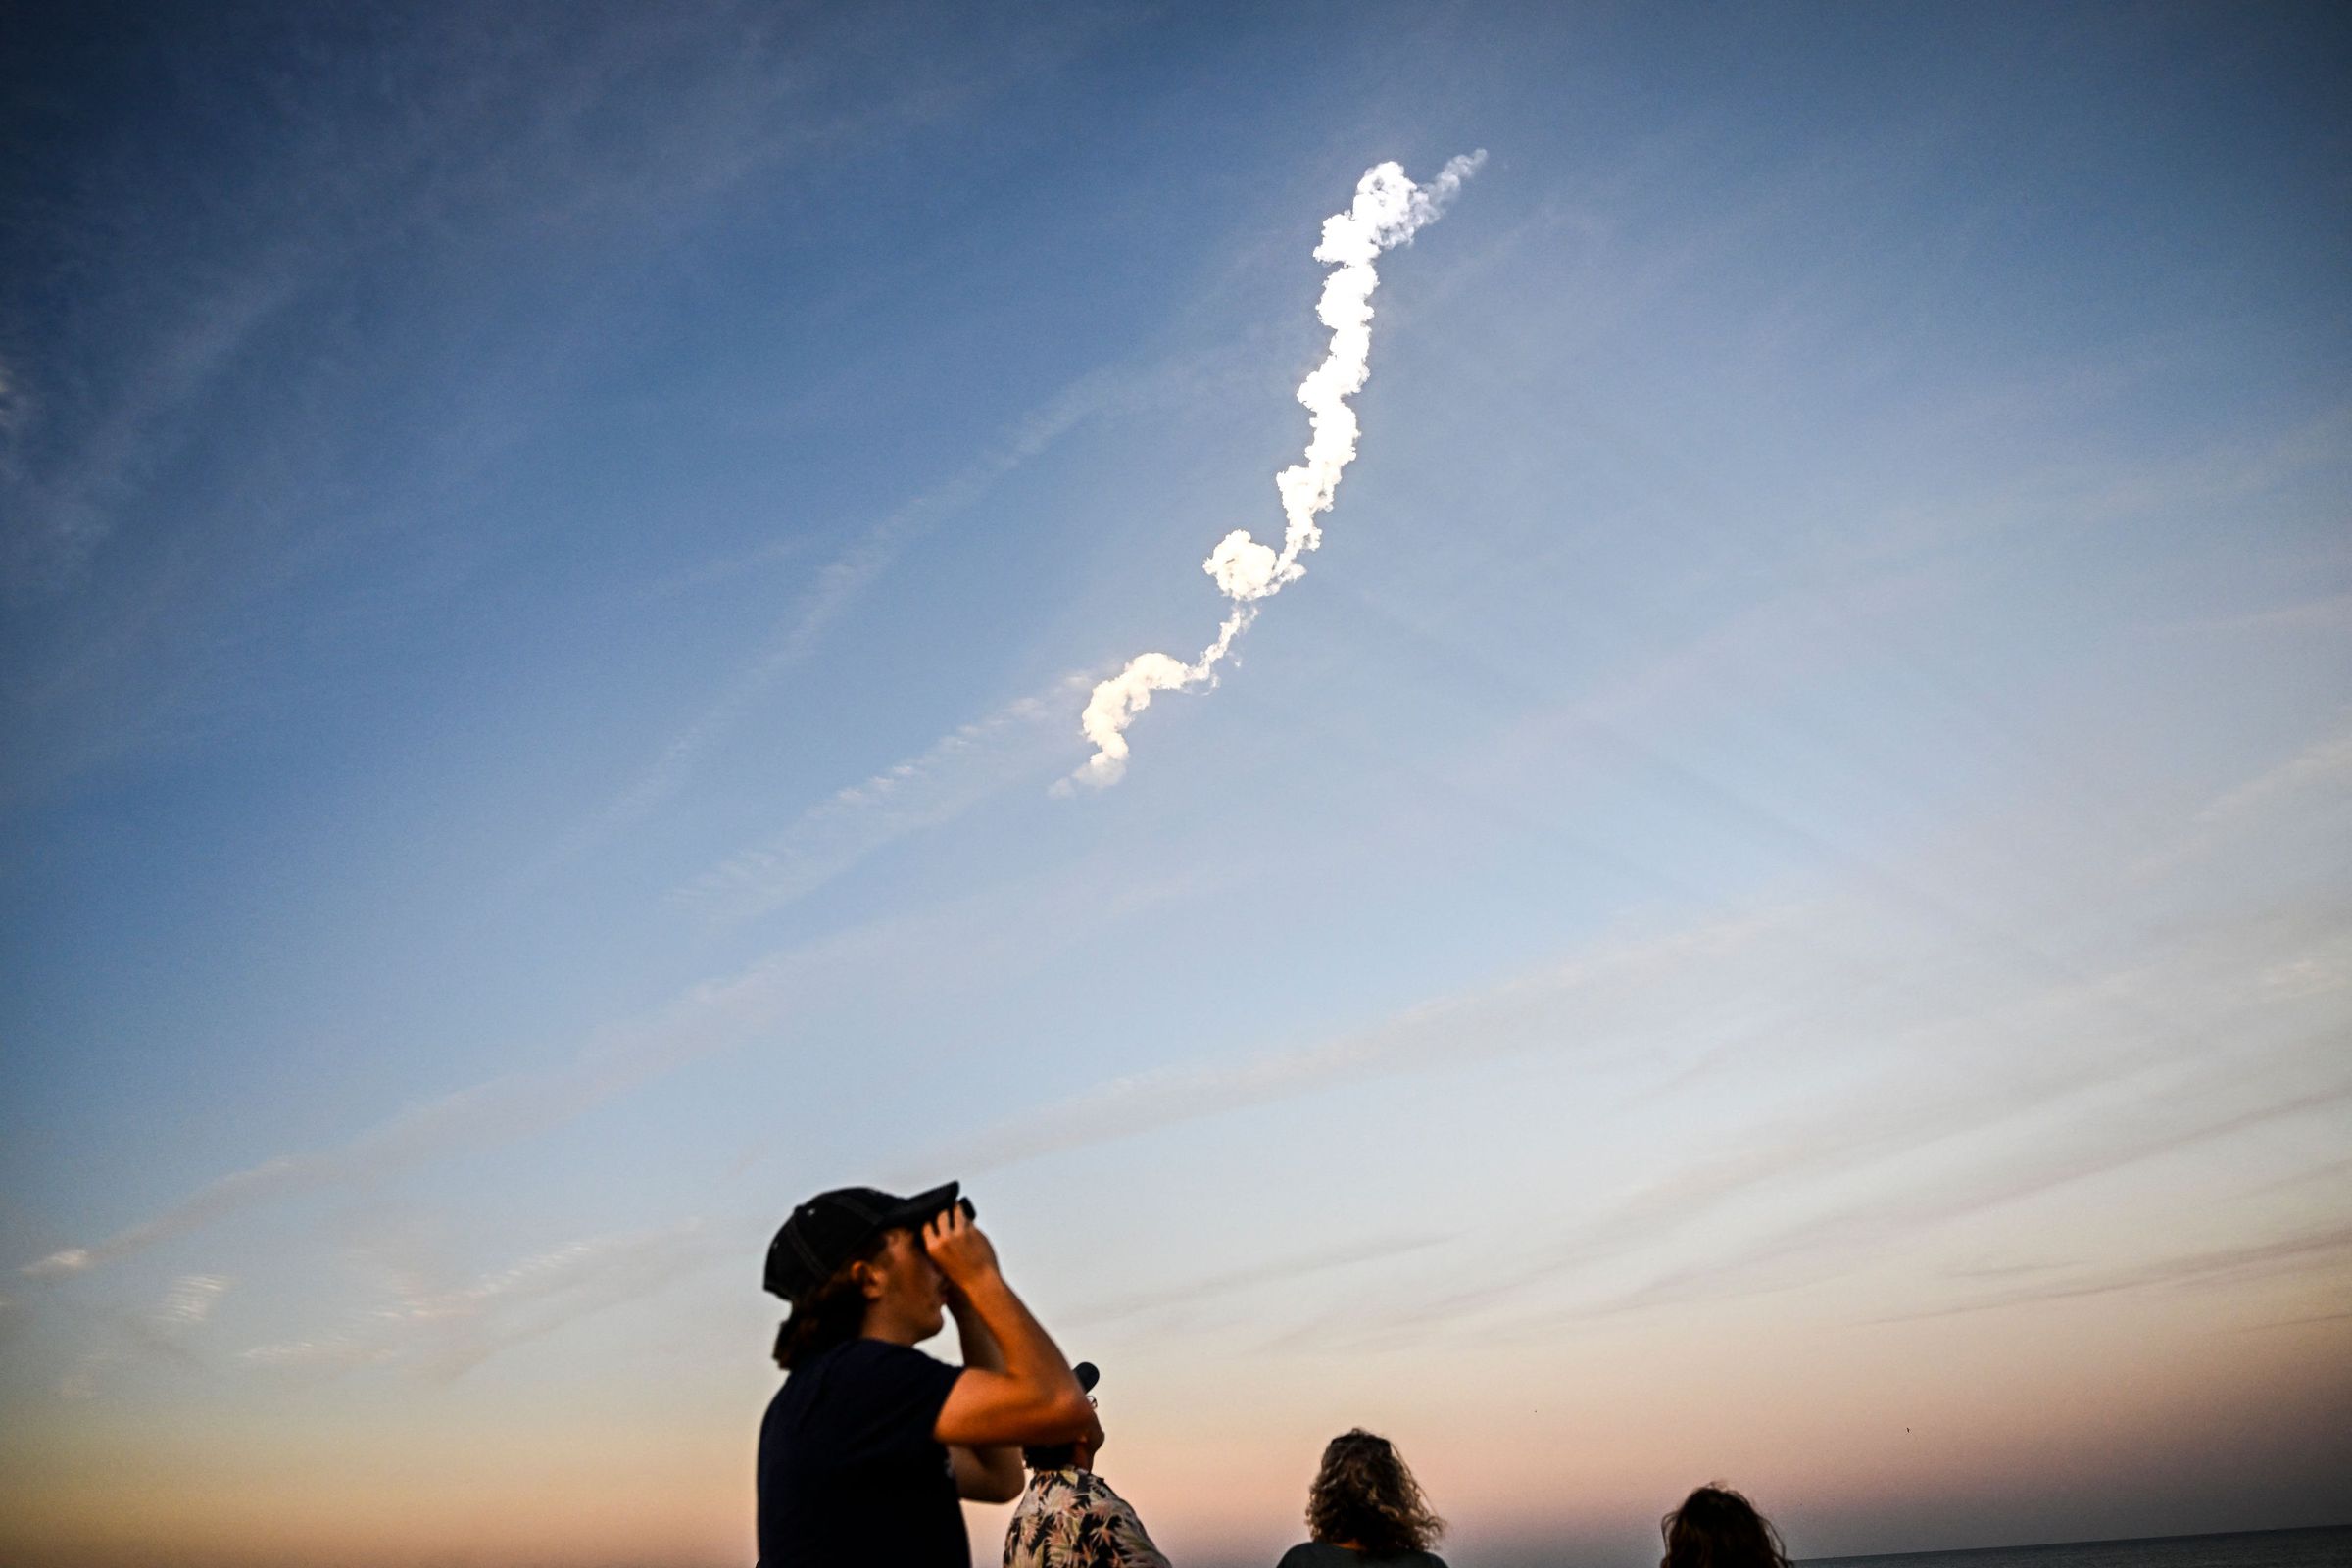 A person looks up into the sky at dusk with binoculars. There’s a rocket trail in the sky above the person.